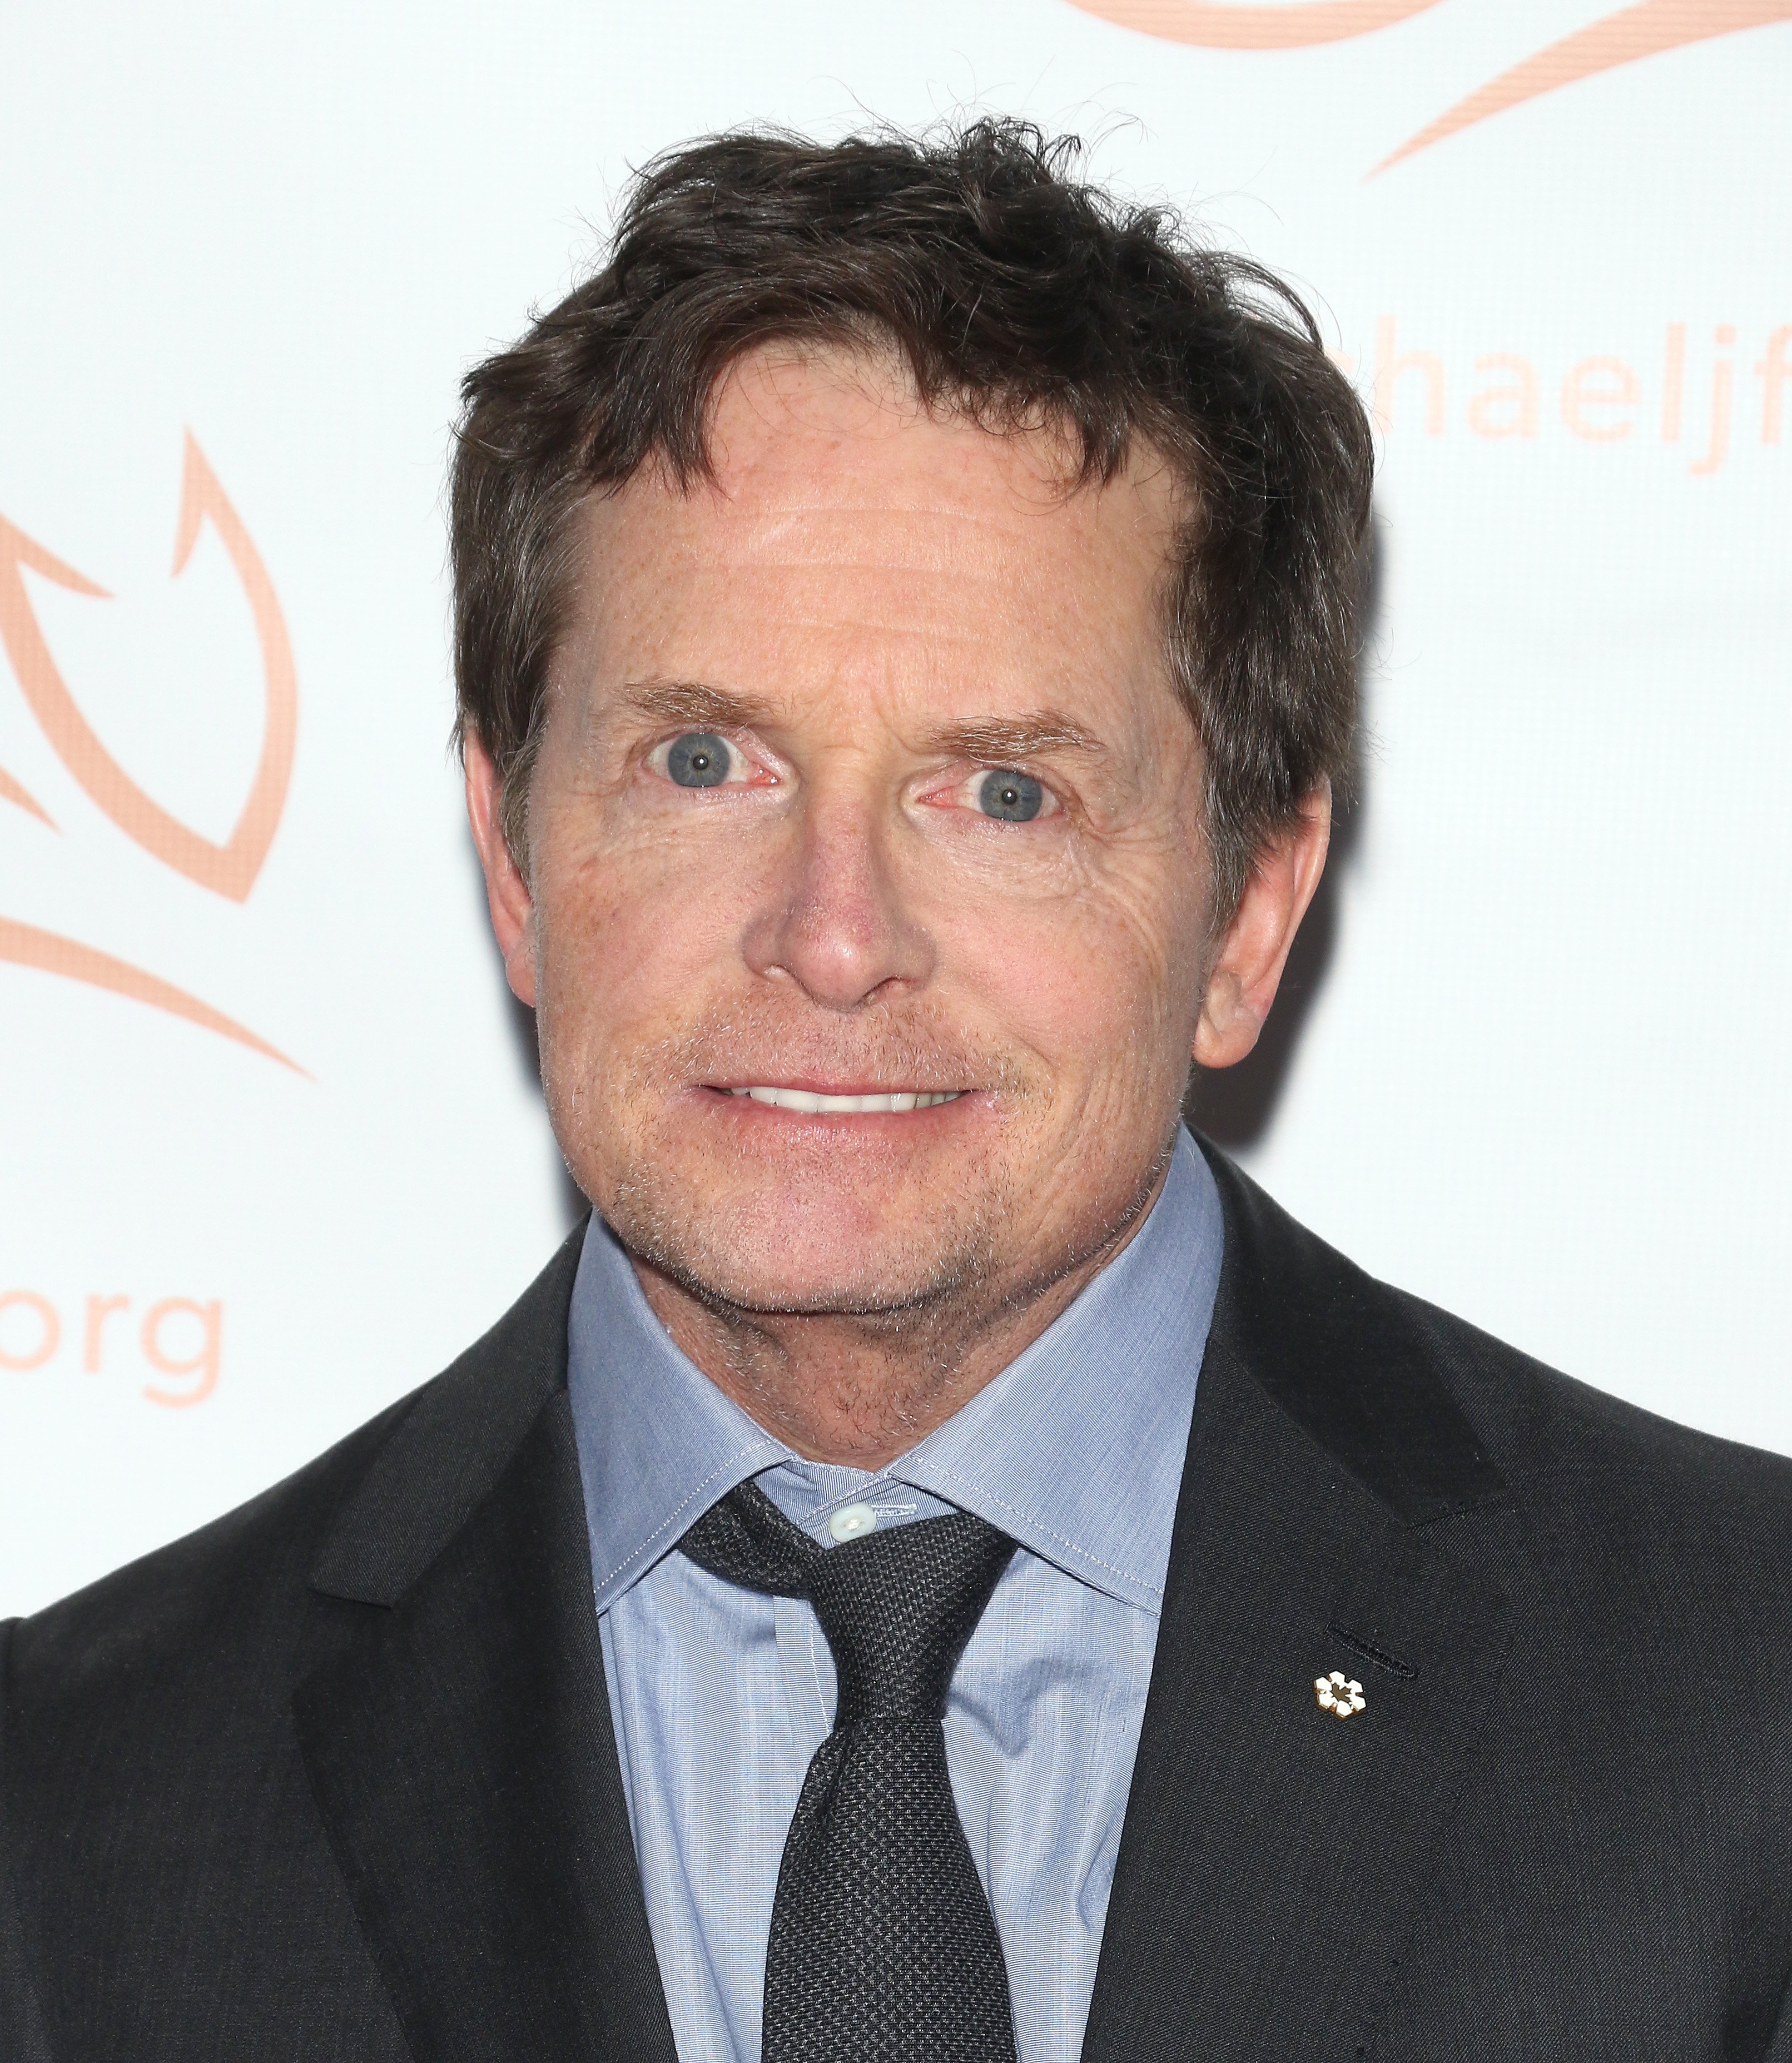 Michael J. Fox at the A Funny Thing Happened On The Way To Cure Parkinson's at the Hilton New York on November 16, 2019, in New York City | Source: Getty Images